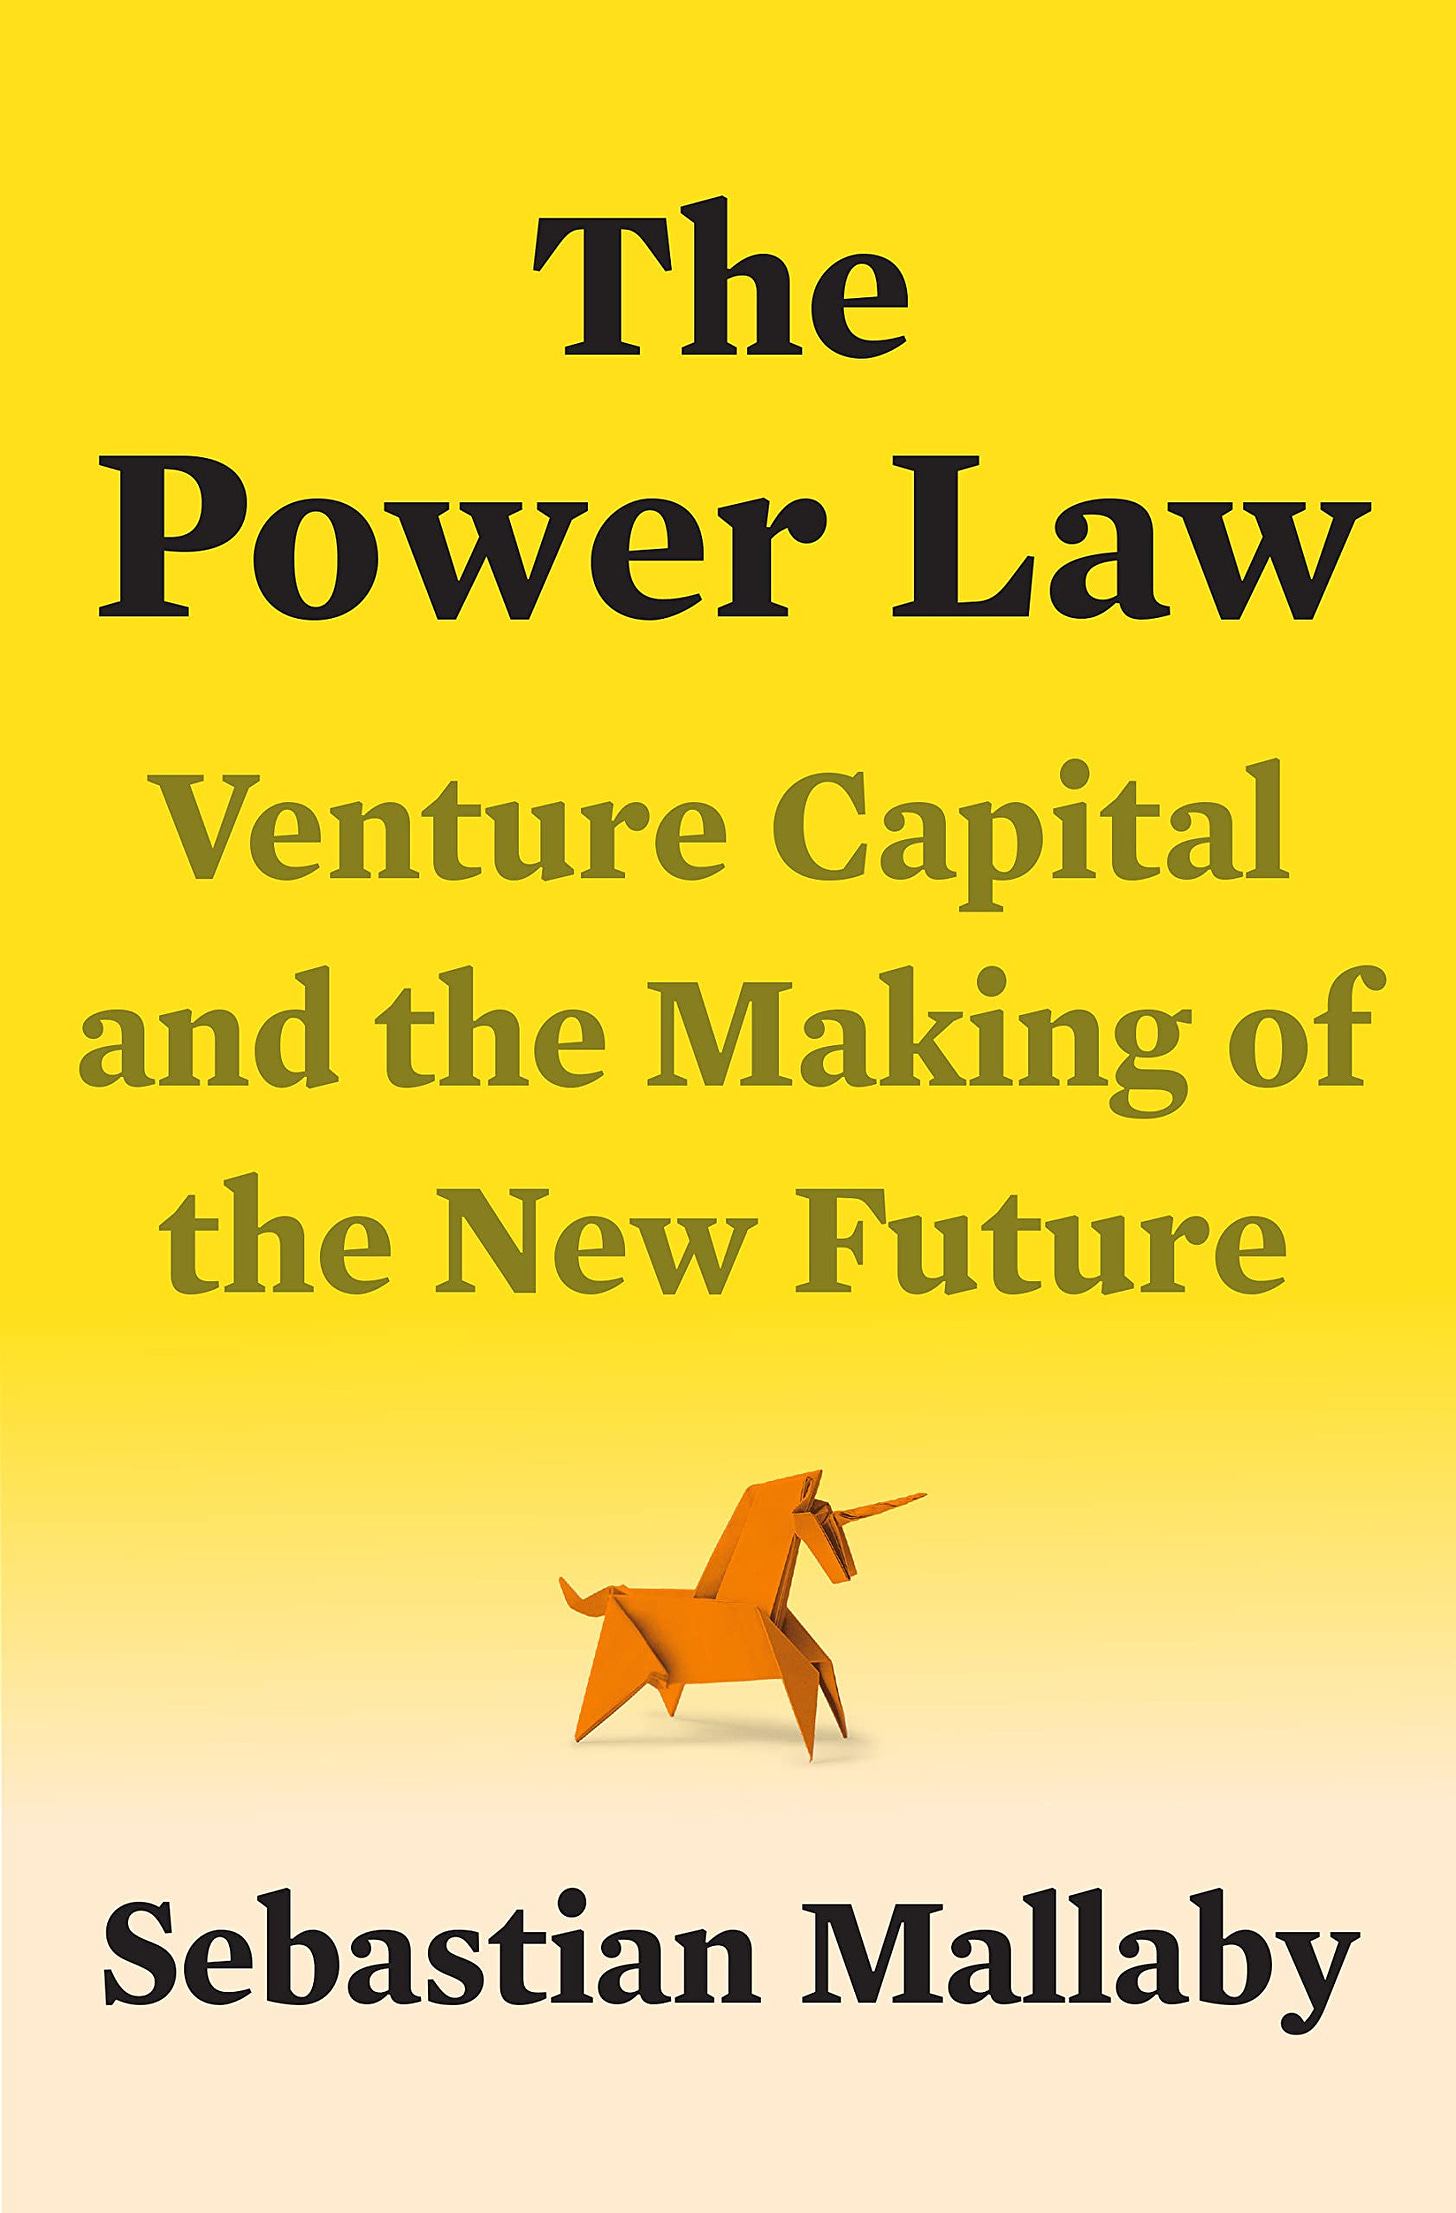 The Power Law: Venture Capital and the Making of the New Future : Mallaby,  Sebastian: Amazon.ca: Books